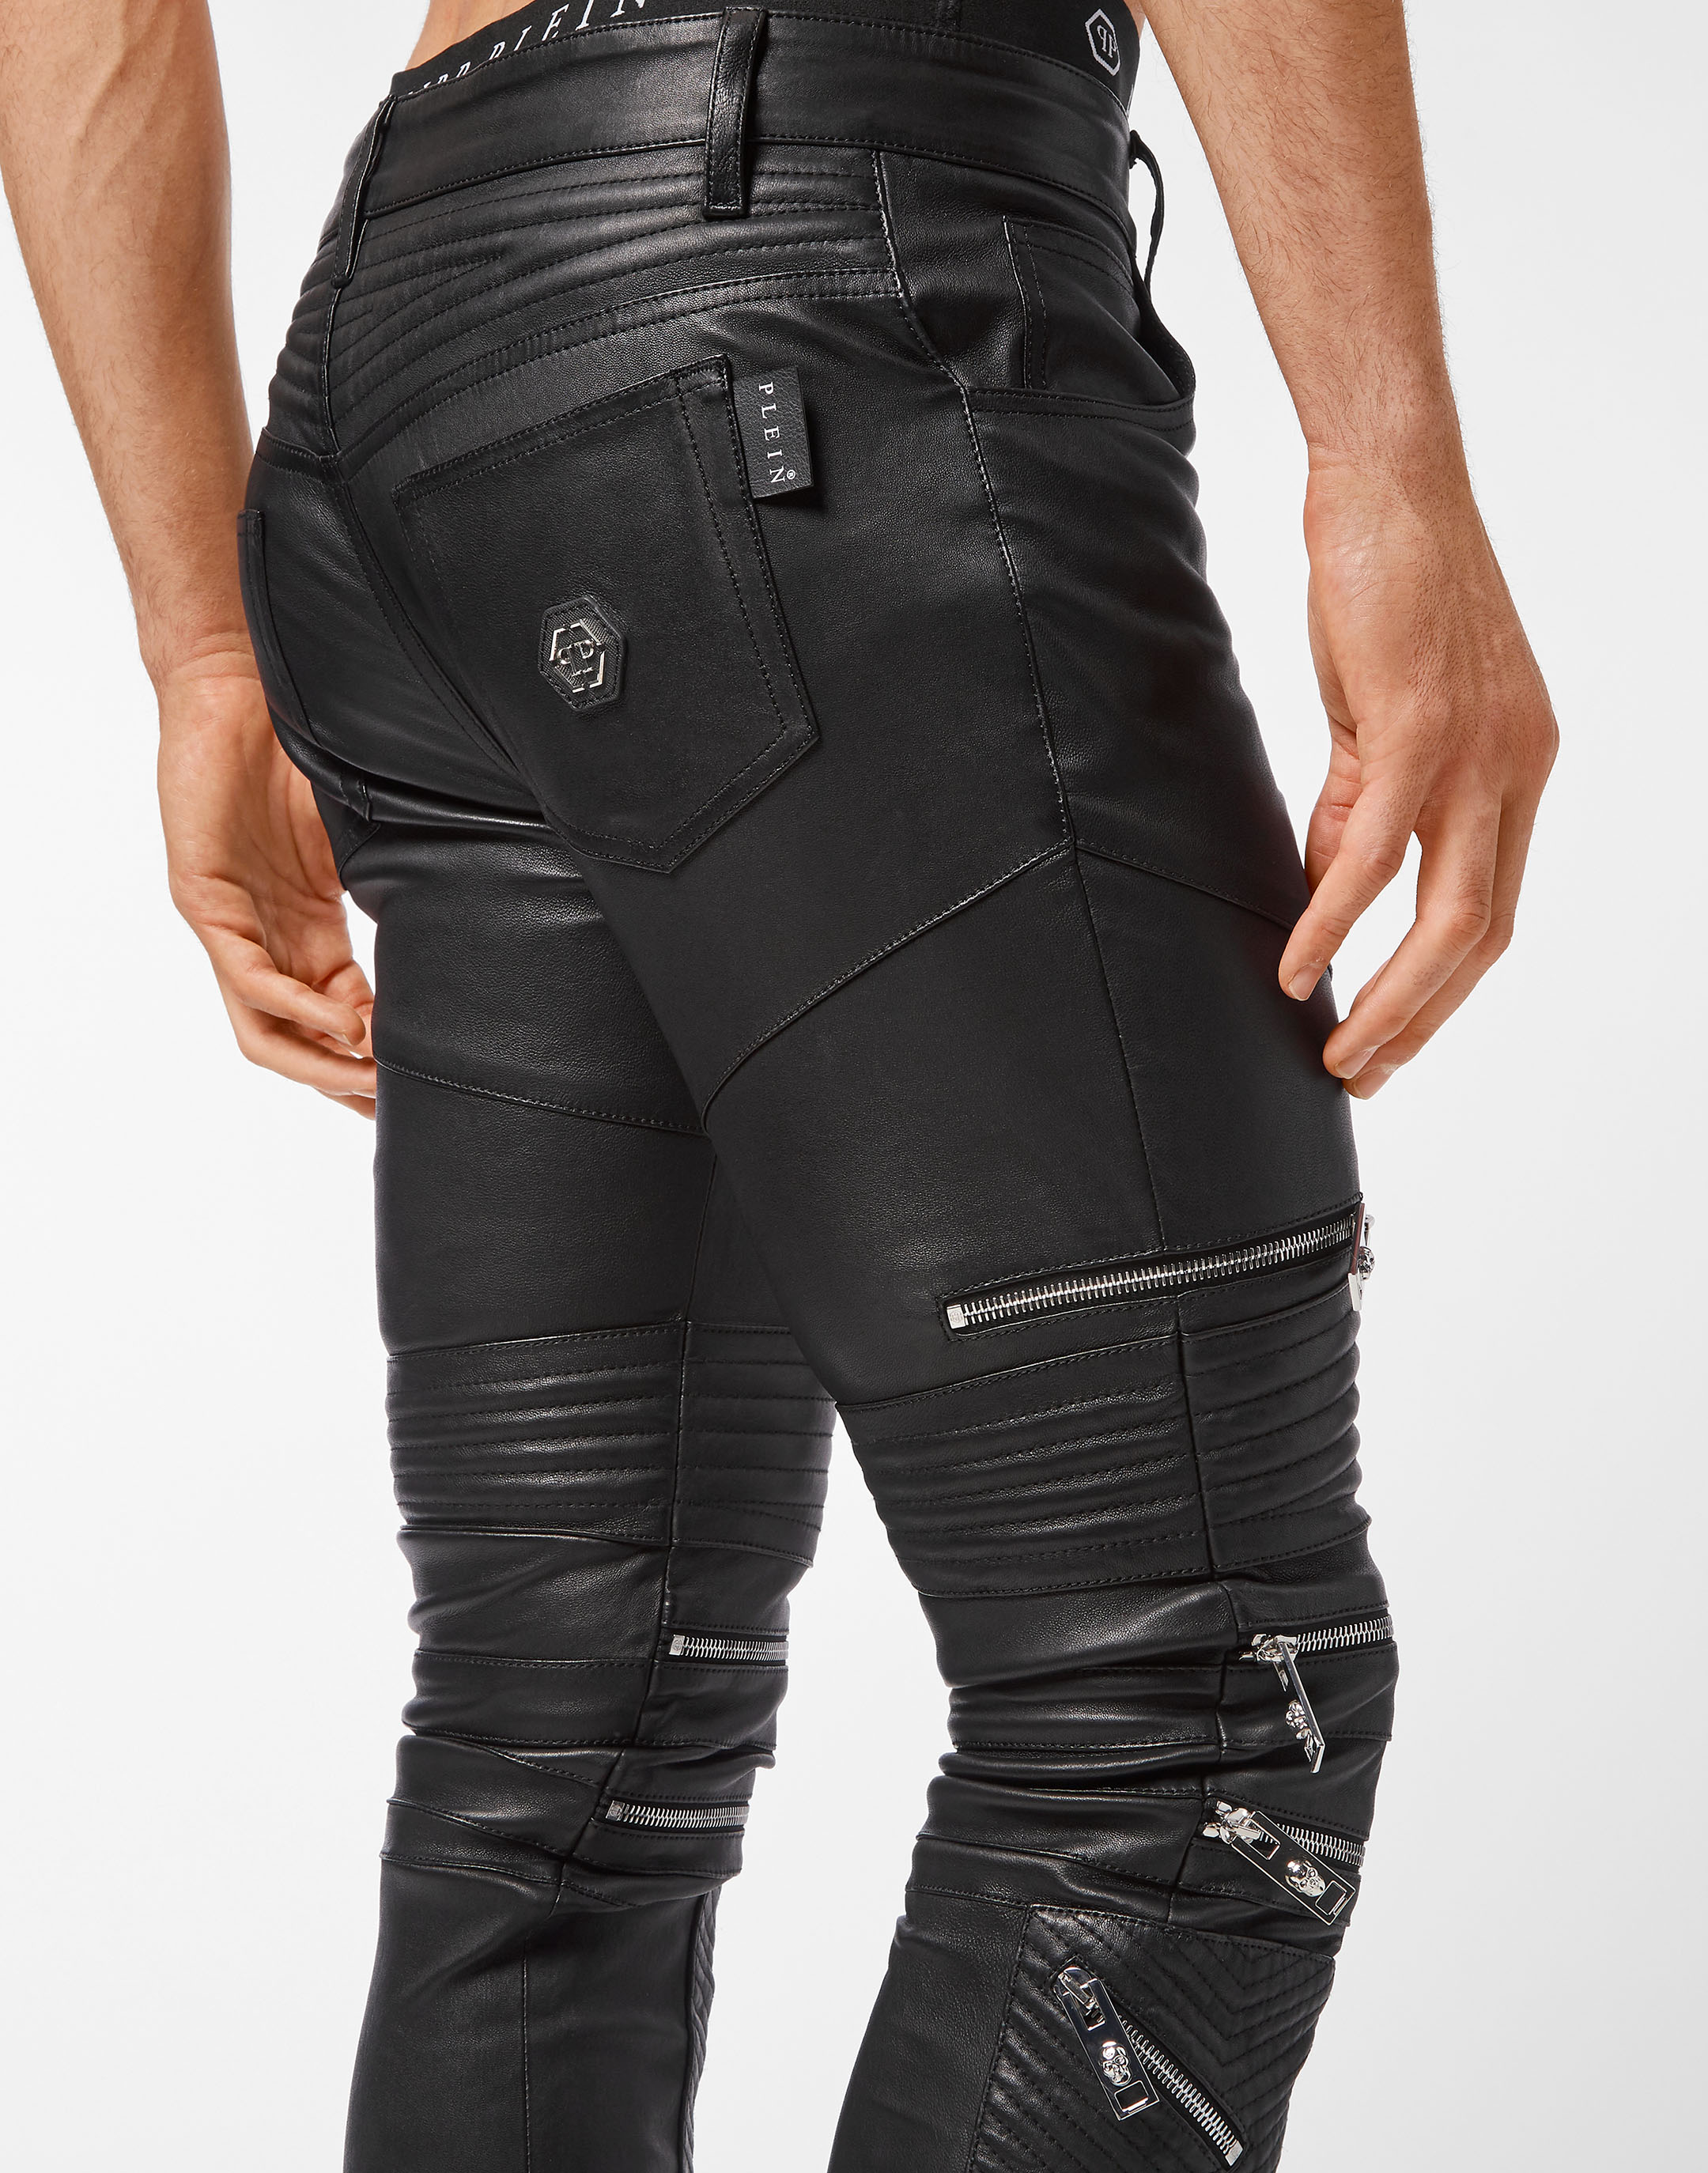 Share more than 80 leather motorcycle pants latest - in.eteachers